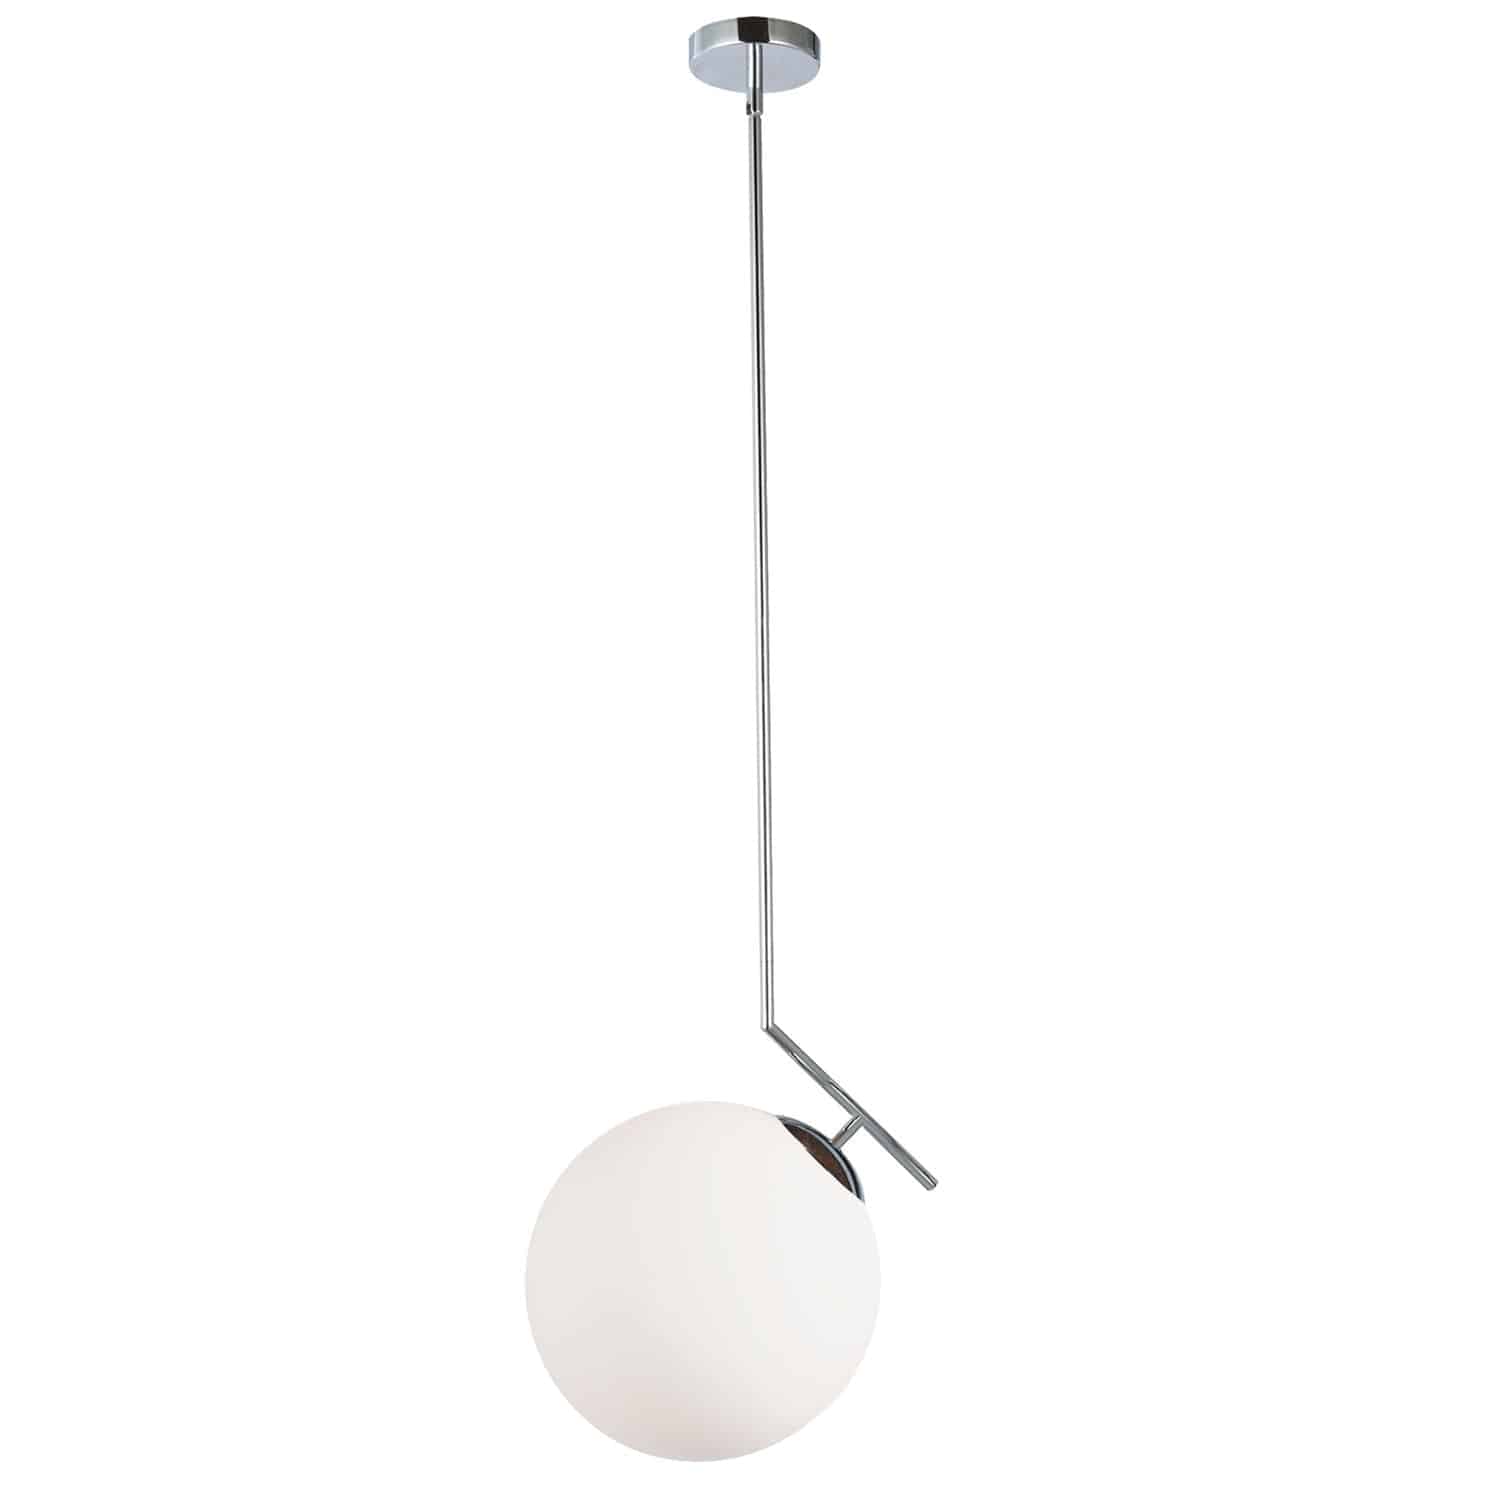 Inspired by the beauty of celestial shapes, the Orion family of lighting contrasts linear elements with glass globes for a space age sense of style. The design comes in a variety of configurations, including straight drops as well as horizontal options. The metal frame in your choice of finish features elegant straight lines in a geometric pattern. The glass globe lights are set inside the design in a variety of eye-catching configurations, according to the format. Orion lighting adds a thoroughly contemporary element of style to your living or dining rooms, or a chic bedroom.